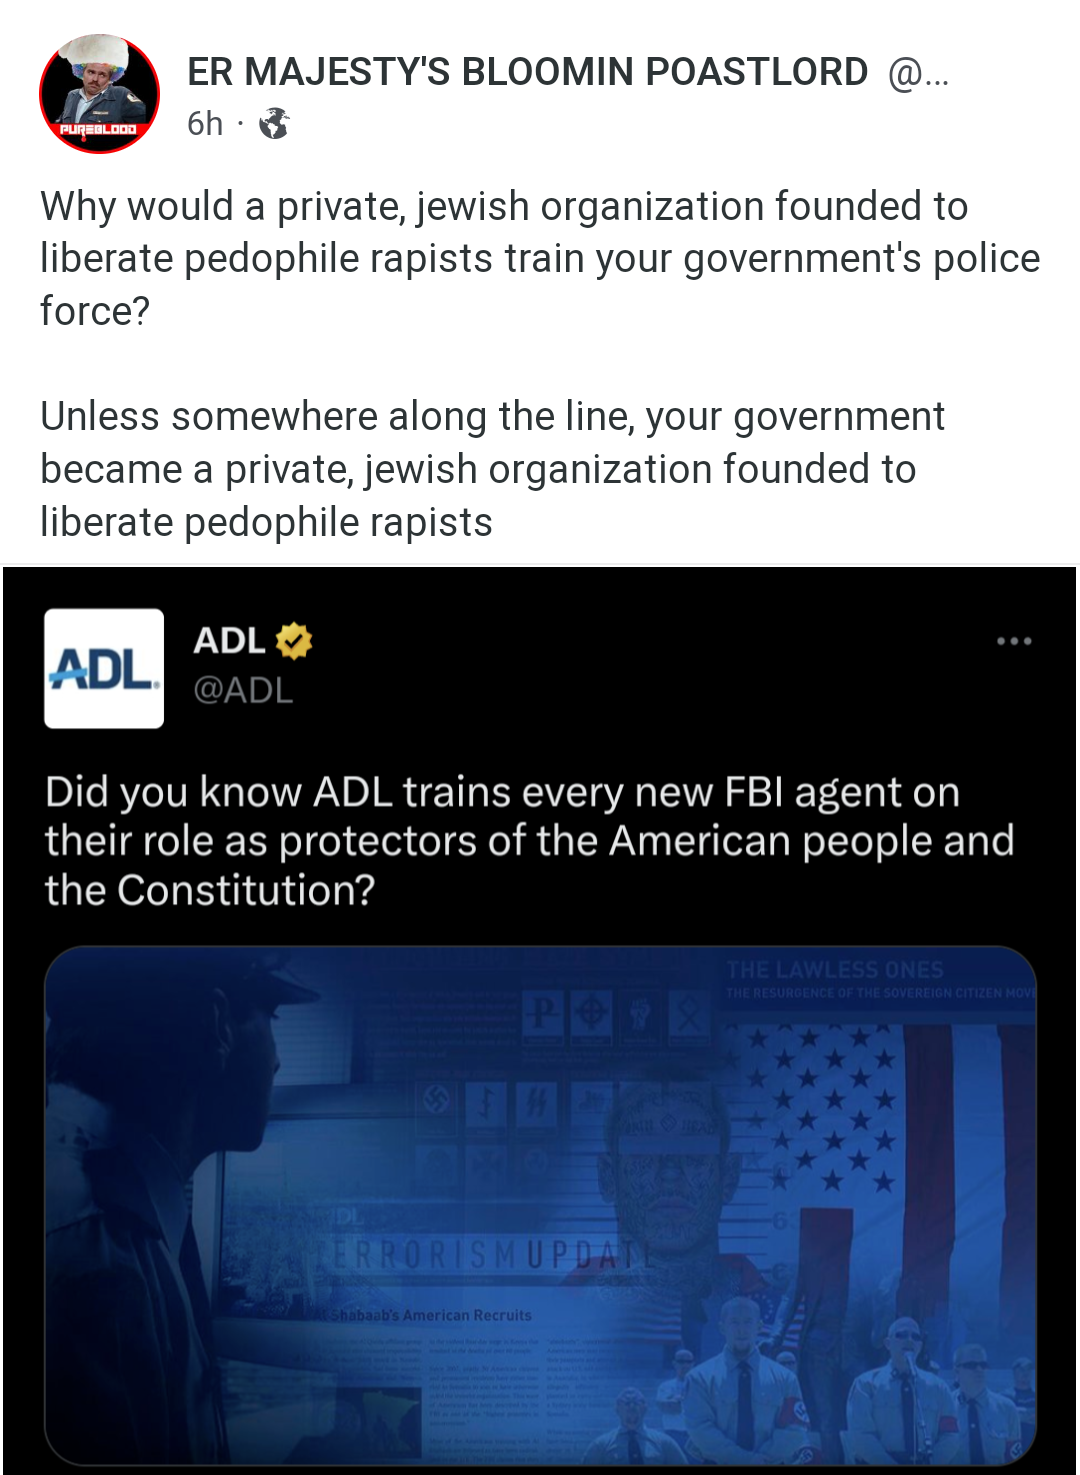 ADL is a hate group